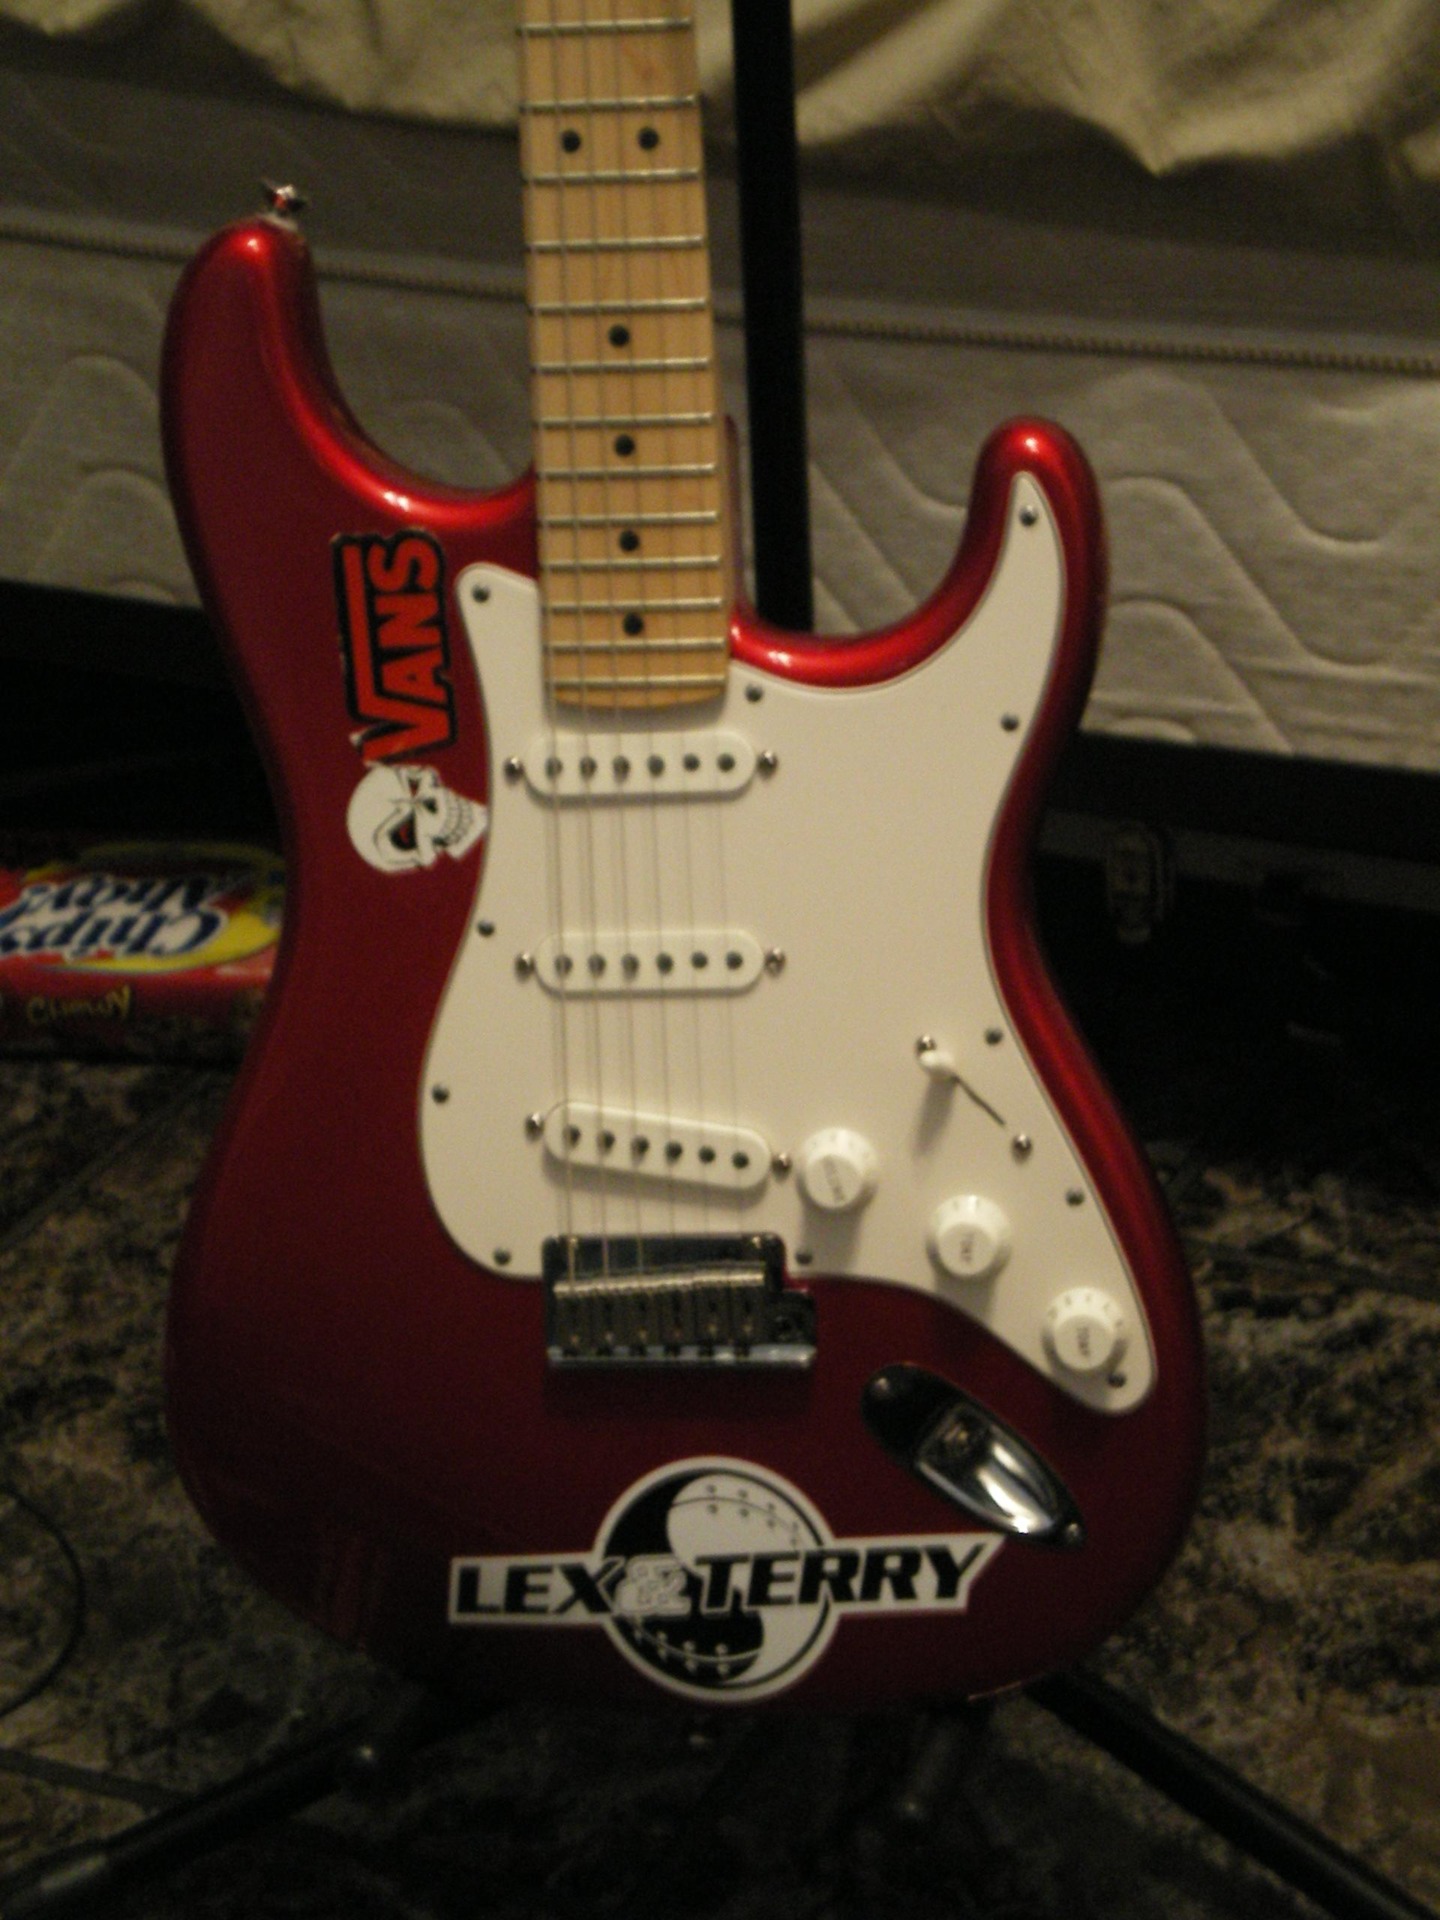  2004 Fender American Stratocaster (Now with Dimarzio Tone Zone in the bridge and sparzel locking tuners, stickers now removed